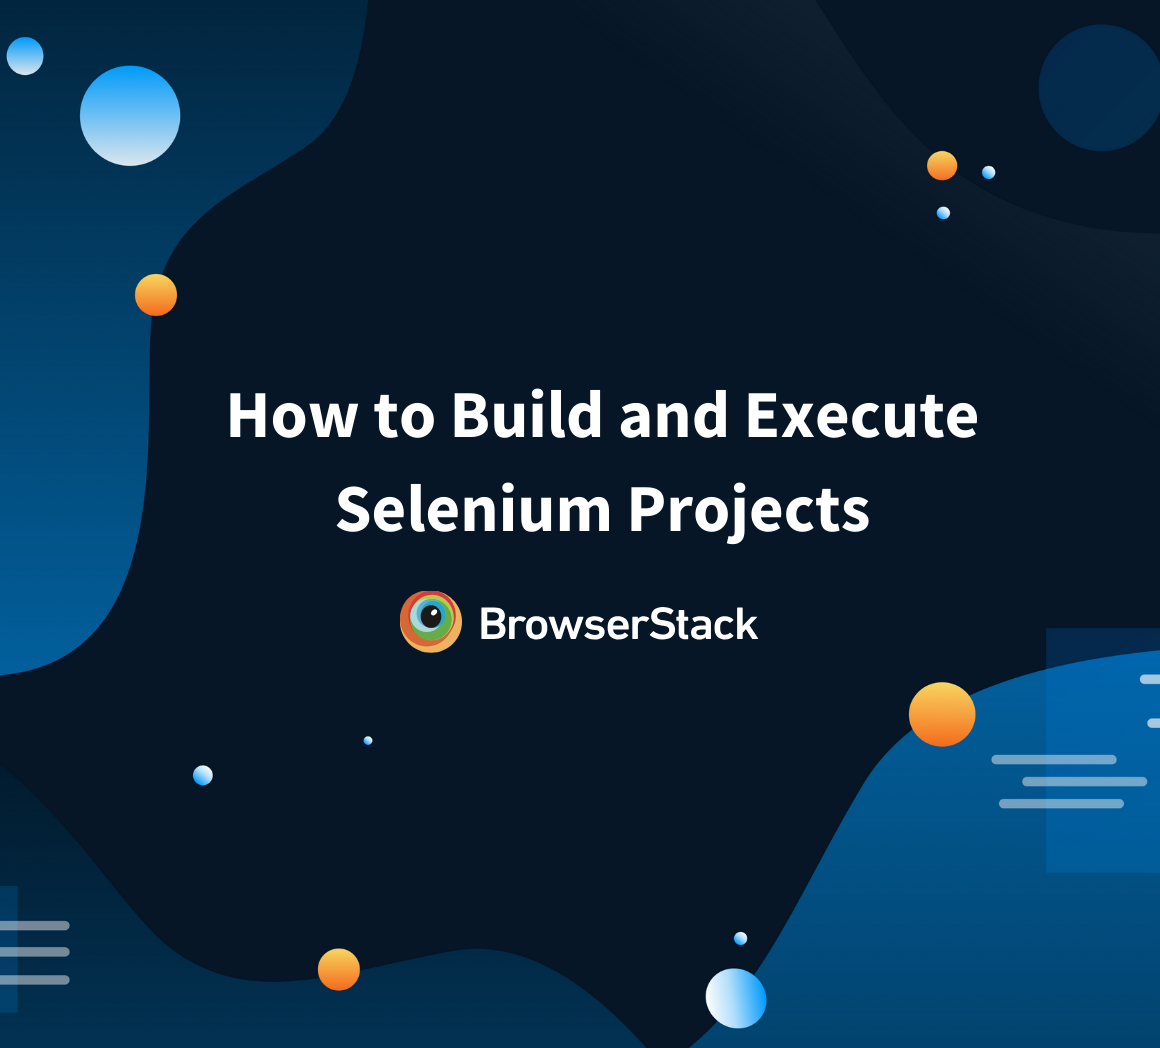 How to build and execute Selenium projects